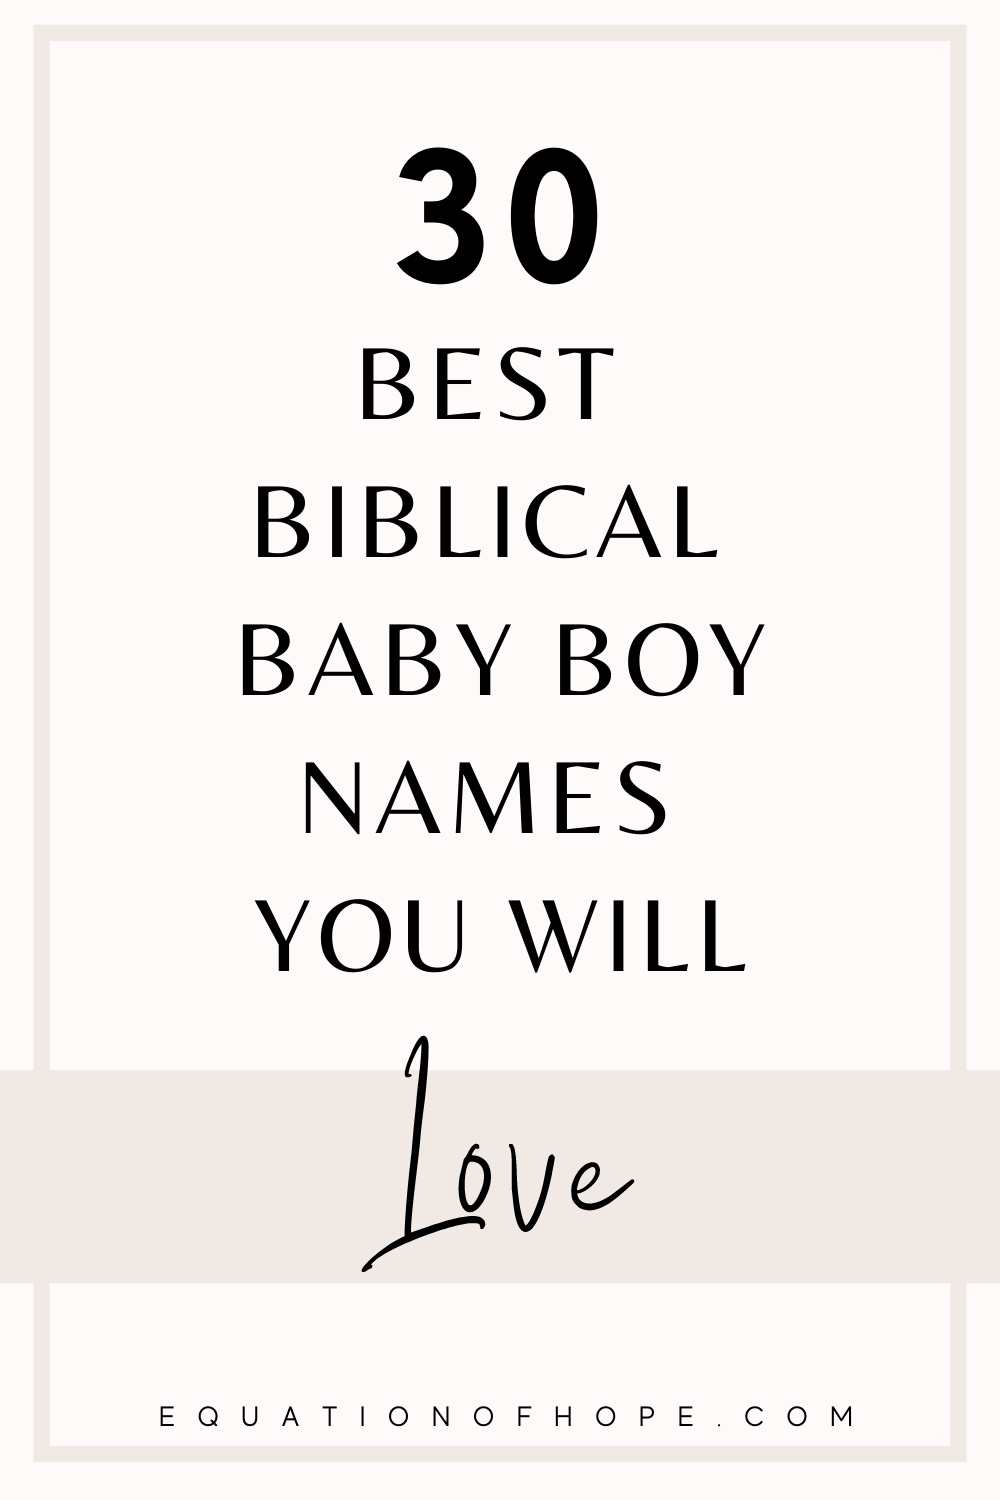 30 Best Biblical Baby Boy Names You Will Love EQUATIONOFHOPE